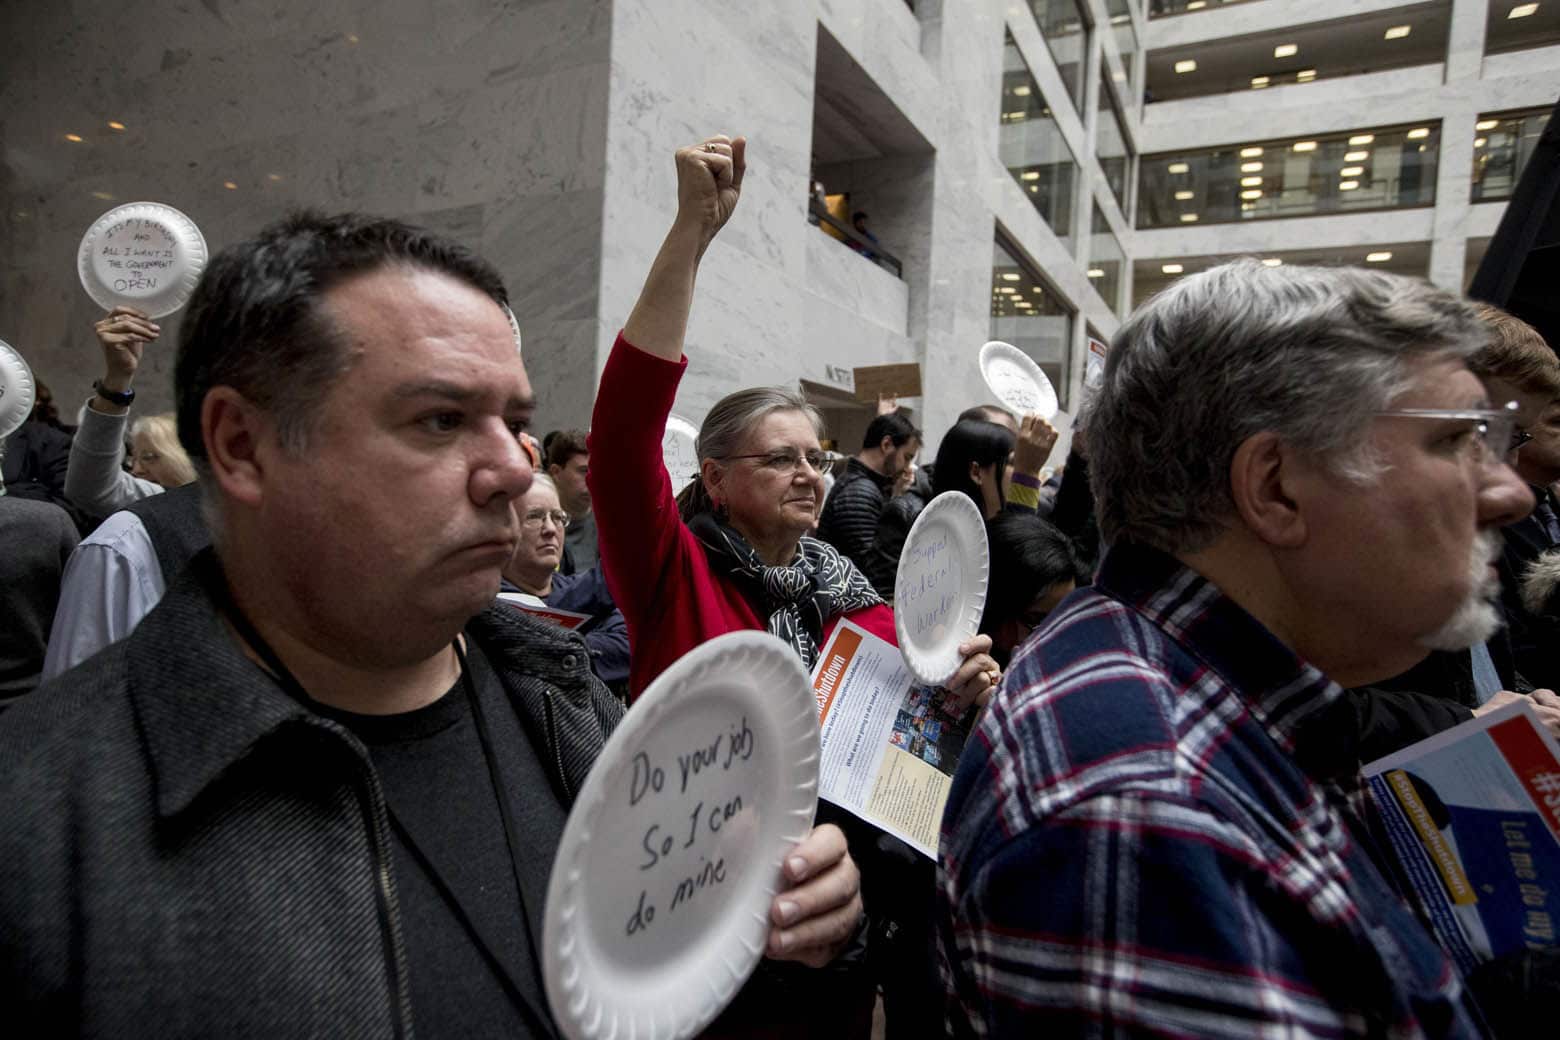 Furloughed government workers affected by the shutdown hold a silent protest against the ongoing partial government shutdown on Capitol Hill in Washington, Wednesday, Jan. 23, 2019. Protesters held up disposable plates instead of posters to avoid being arrested. (AP Photo/Andrew Harnik)